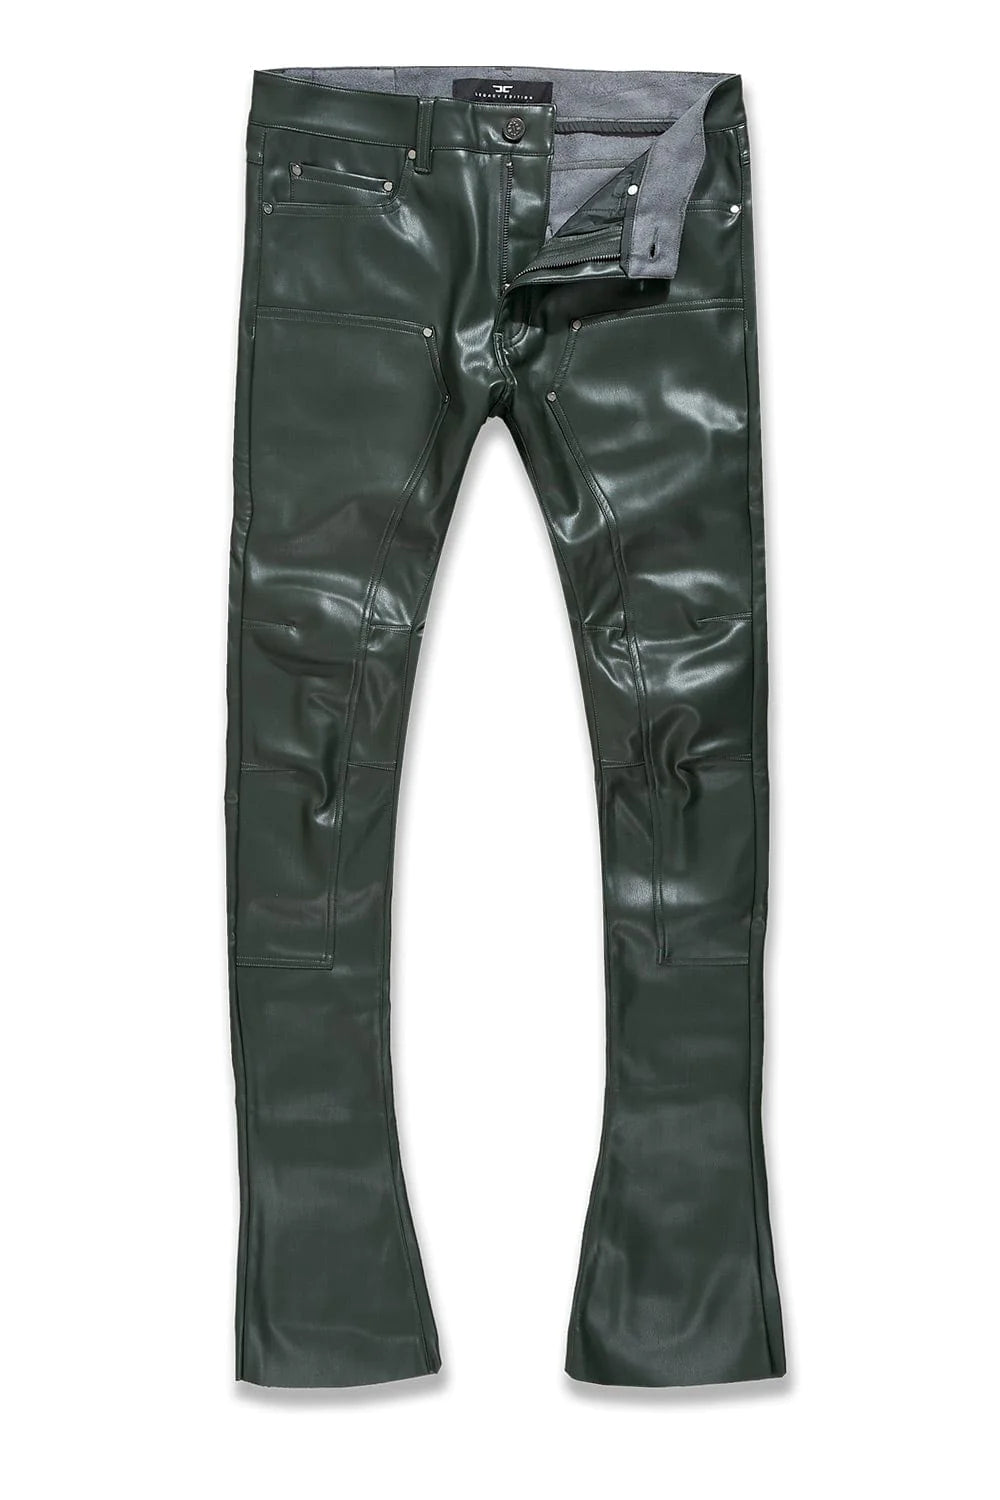 ROSS STACKED - MONTE CARLO PANTS (OLIVE) JRF1135